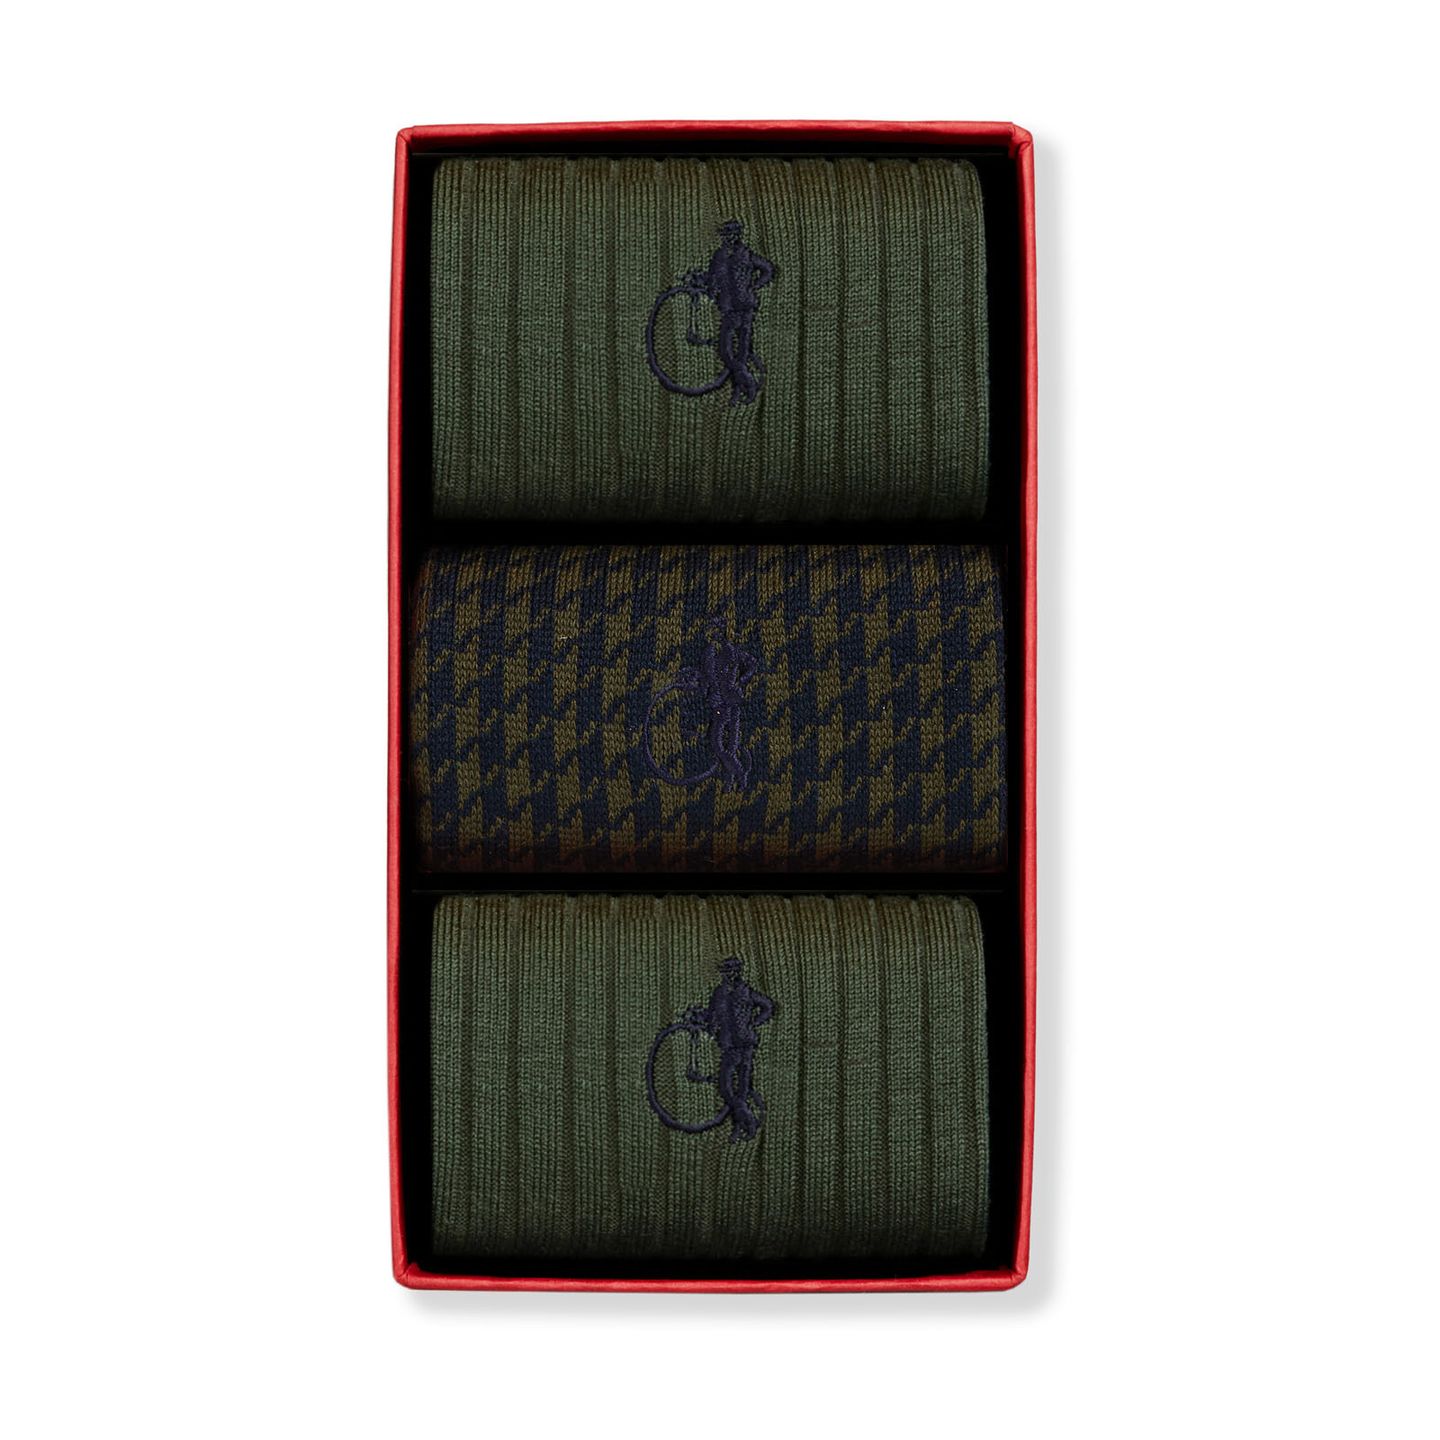 3 pair of olive green socks in a box